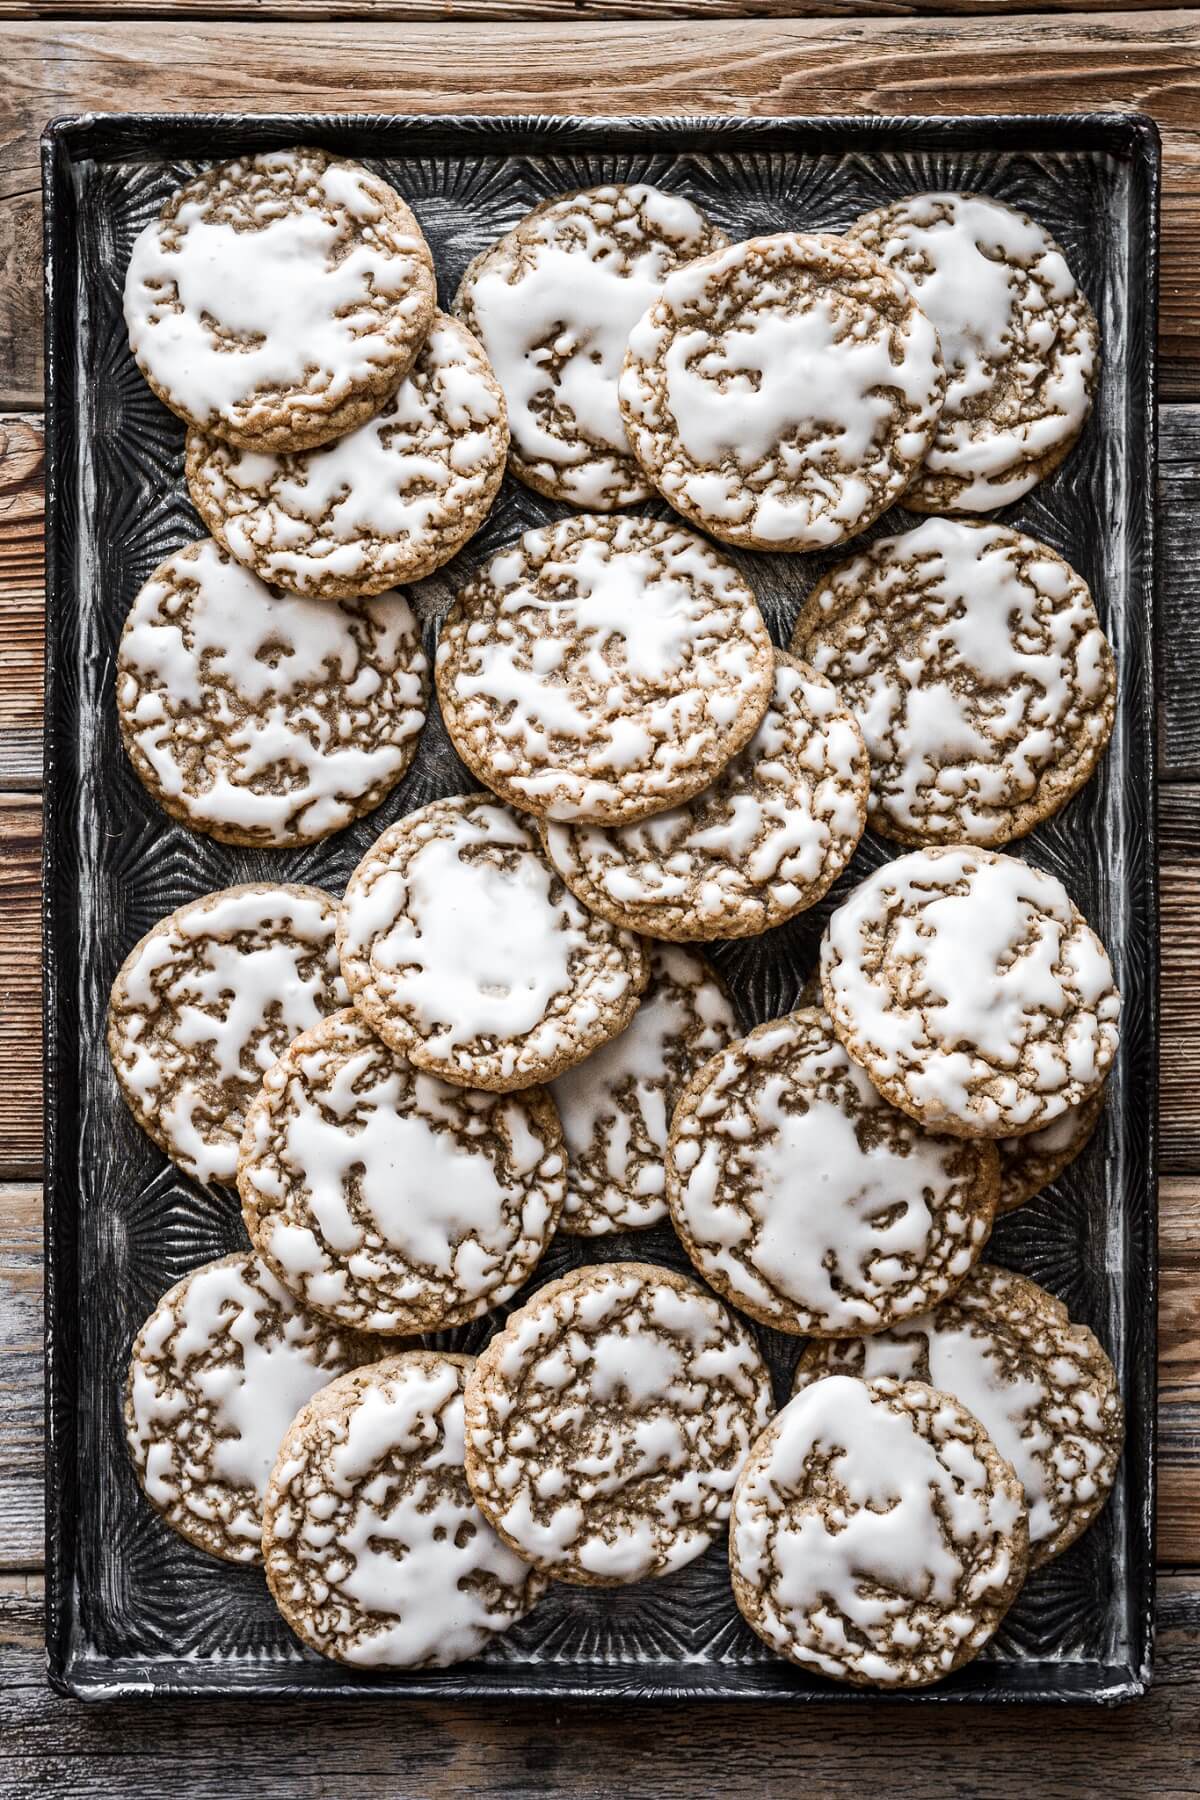 Baking sheet full of old fashioned iced oatmeal cookies.